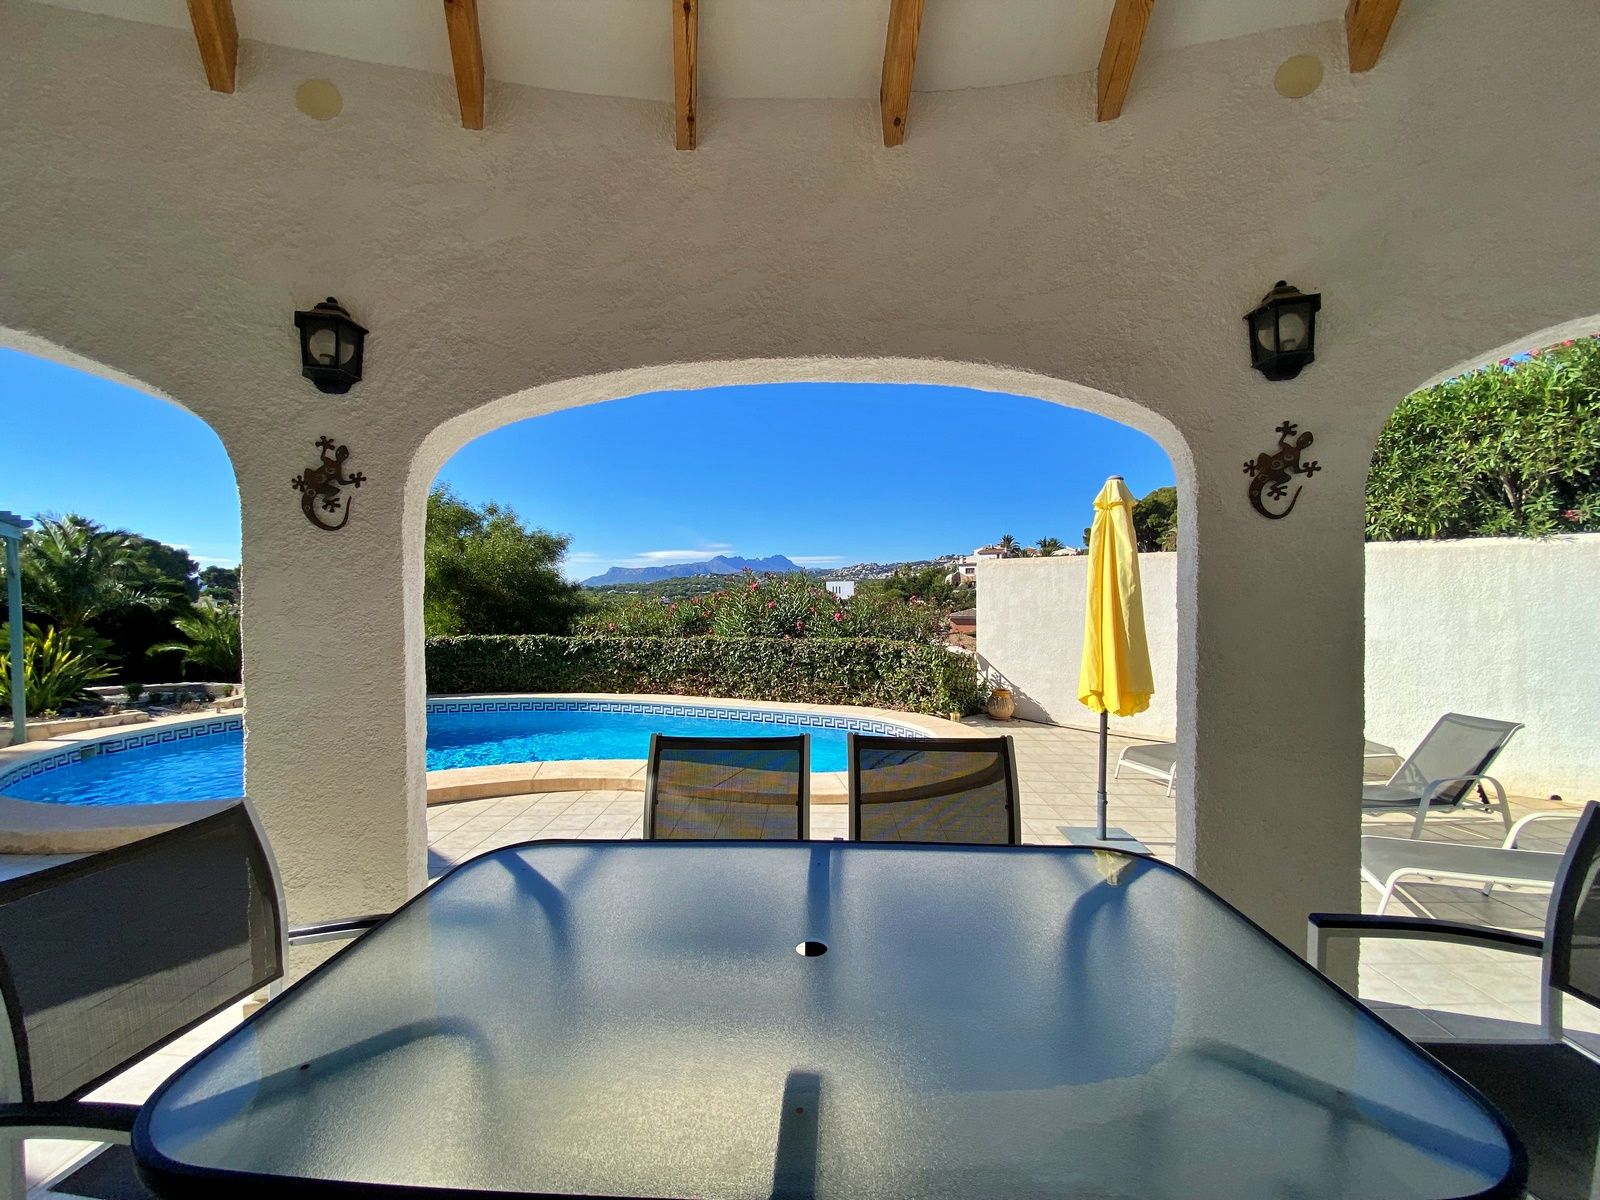 Villa with tourist license for sale at walking distance to Moraira | Ref: HO474372